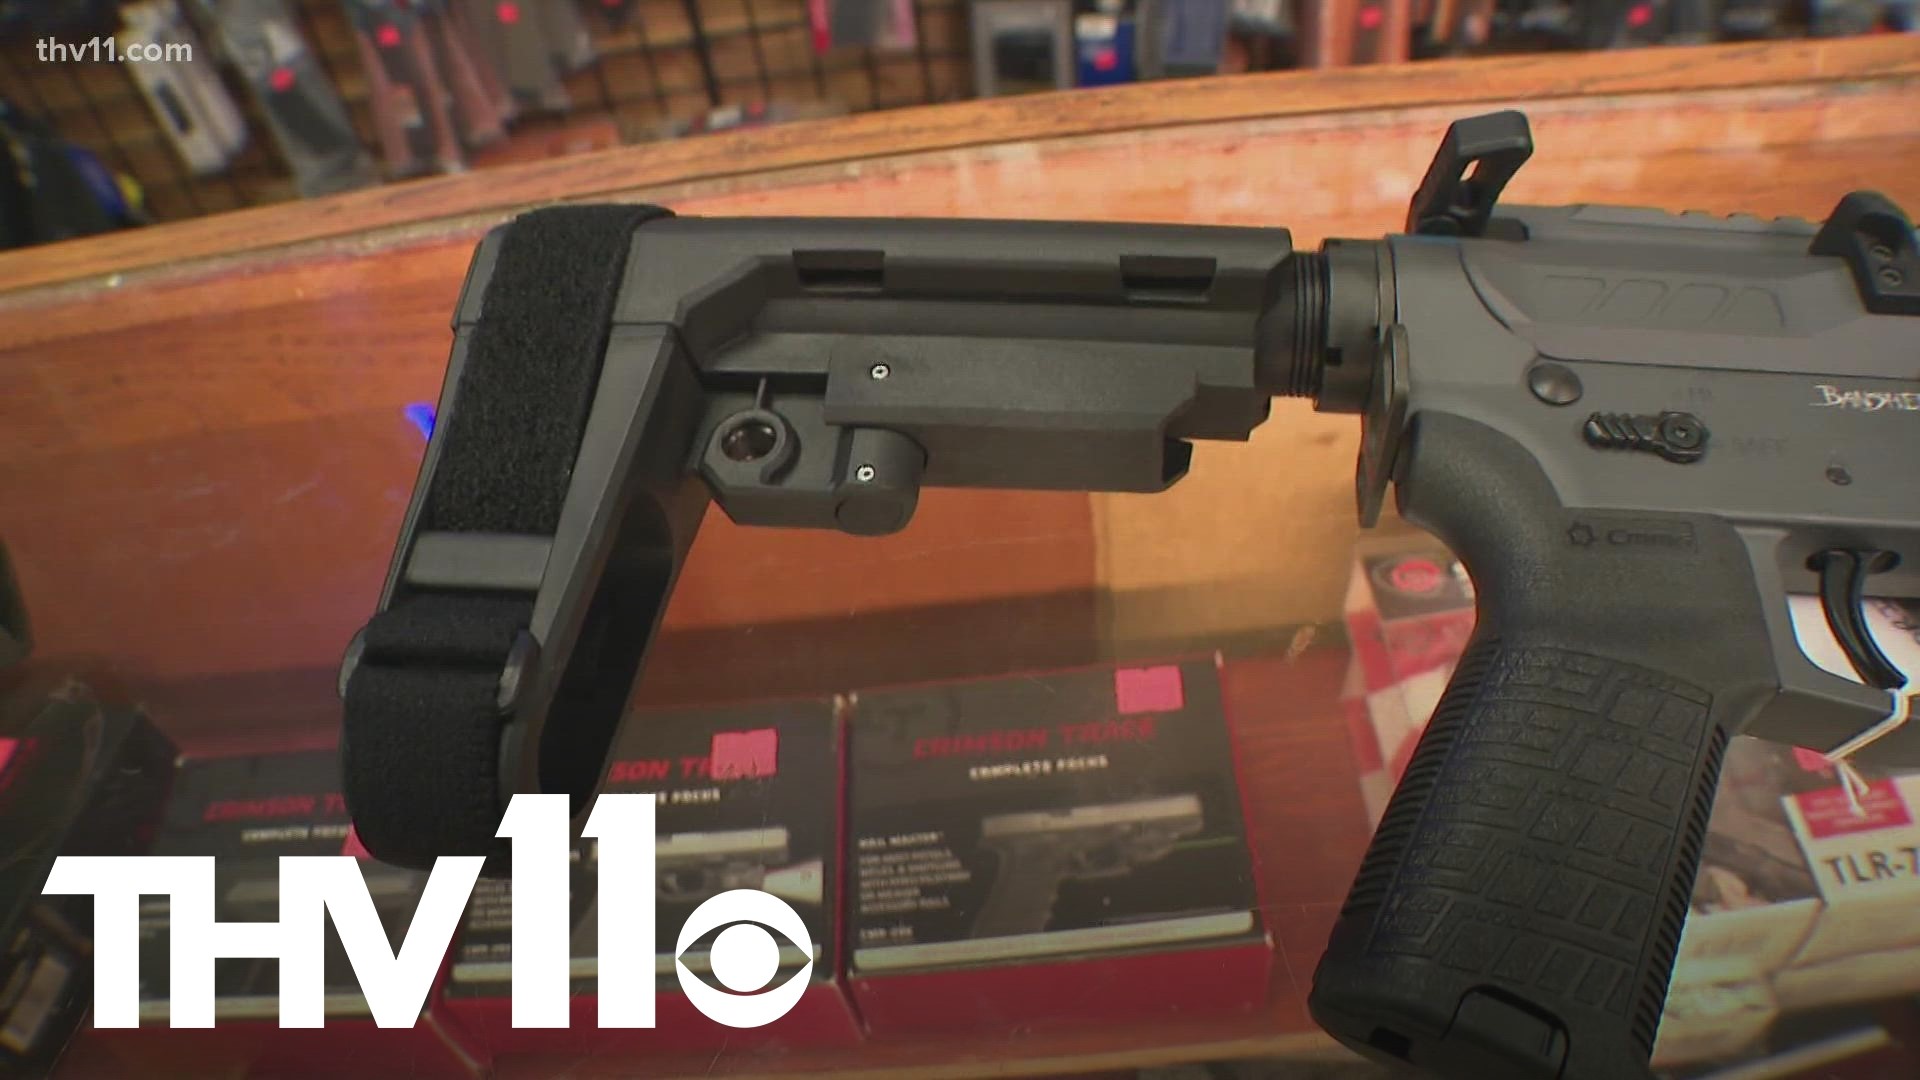 Those who use a brace stabilizer will have to register their weapons with the government. Gun control groups support it, but not everyone agrees with the new policy.